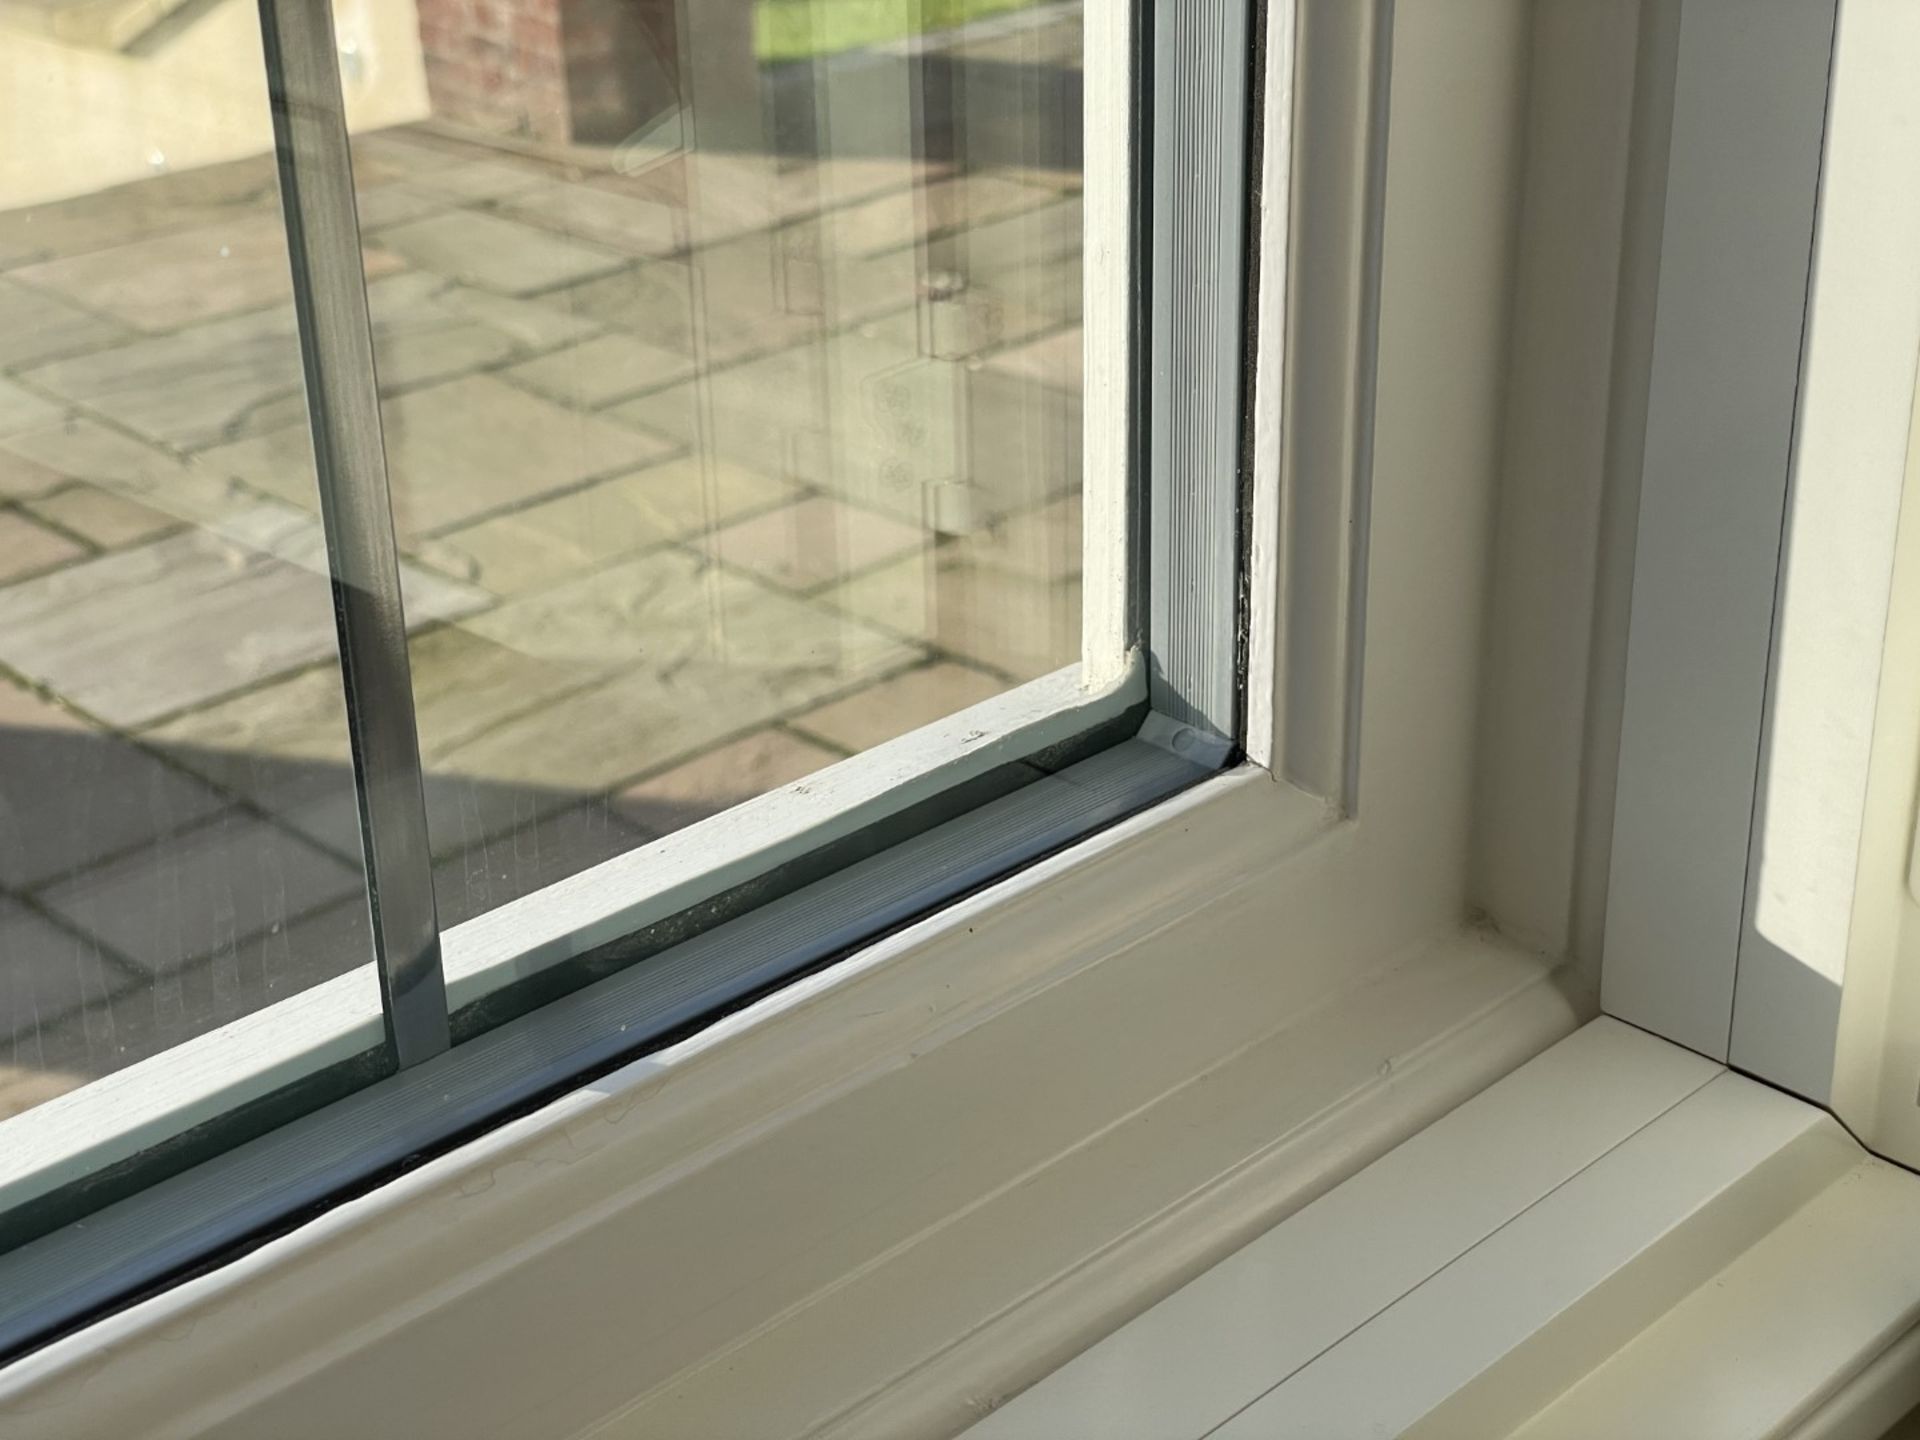 1 x Hardwood Timber Double Glazed Window Frames fitted with Shutter Blinds, In White - Ref: PAN107 - Image 13 of 15